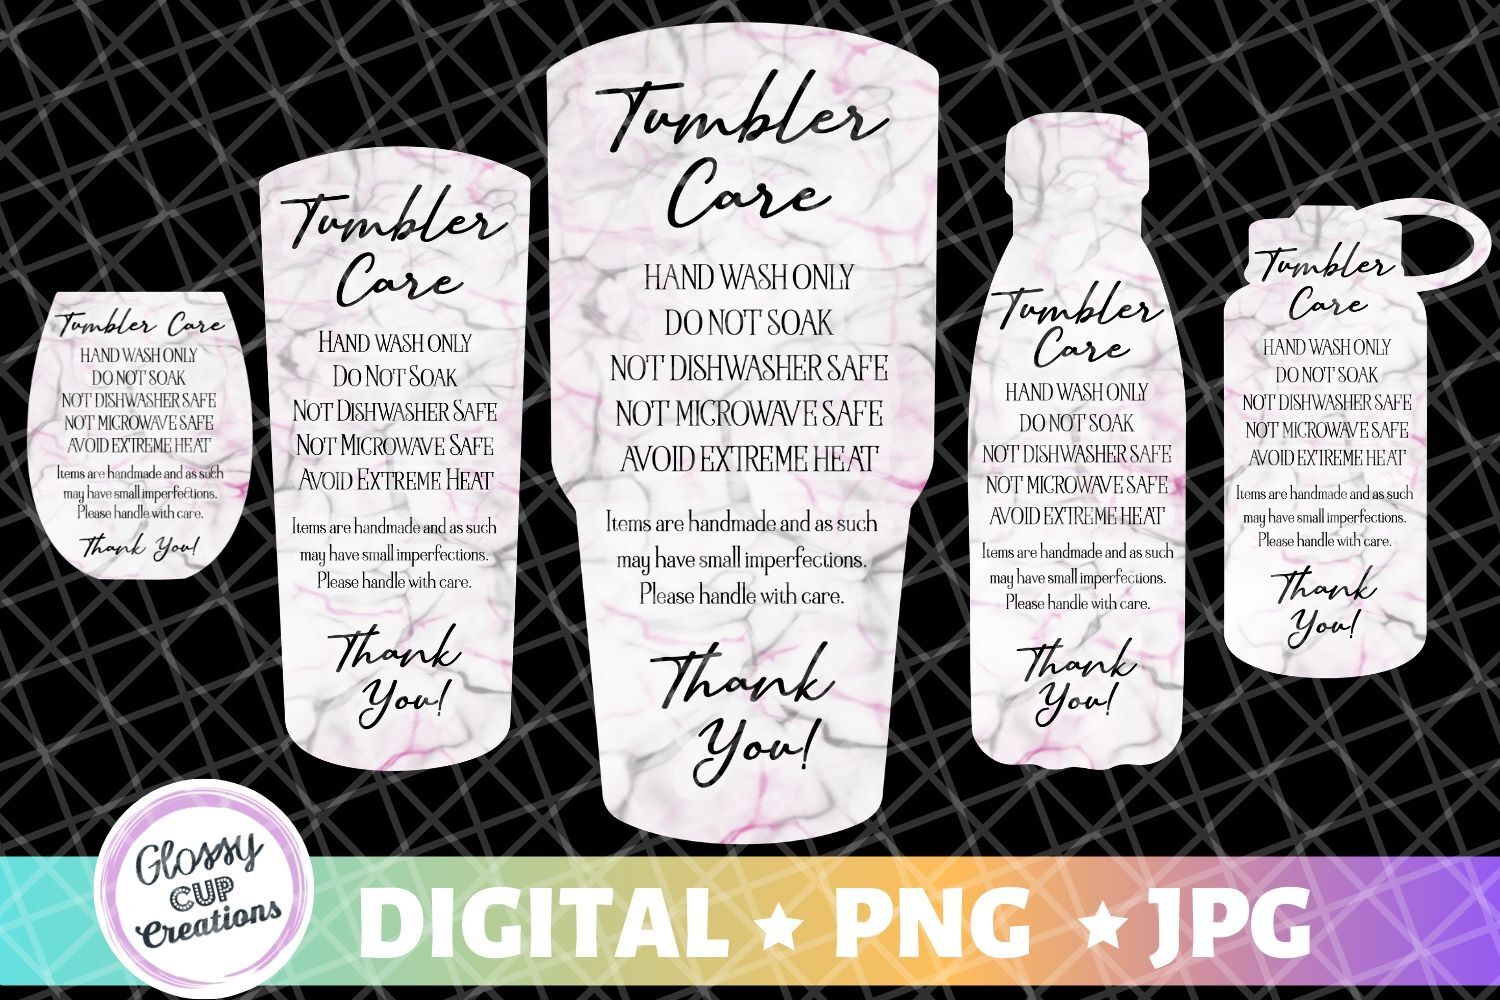 Tumbler Care Cards - Black and Pink Marble - 5 Pack! By Glossy Cup  Creations